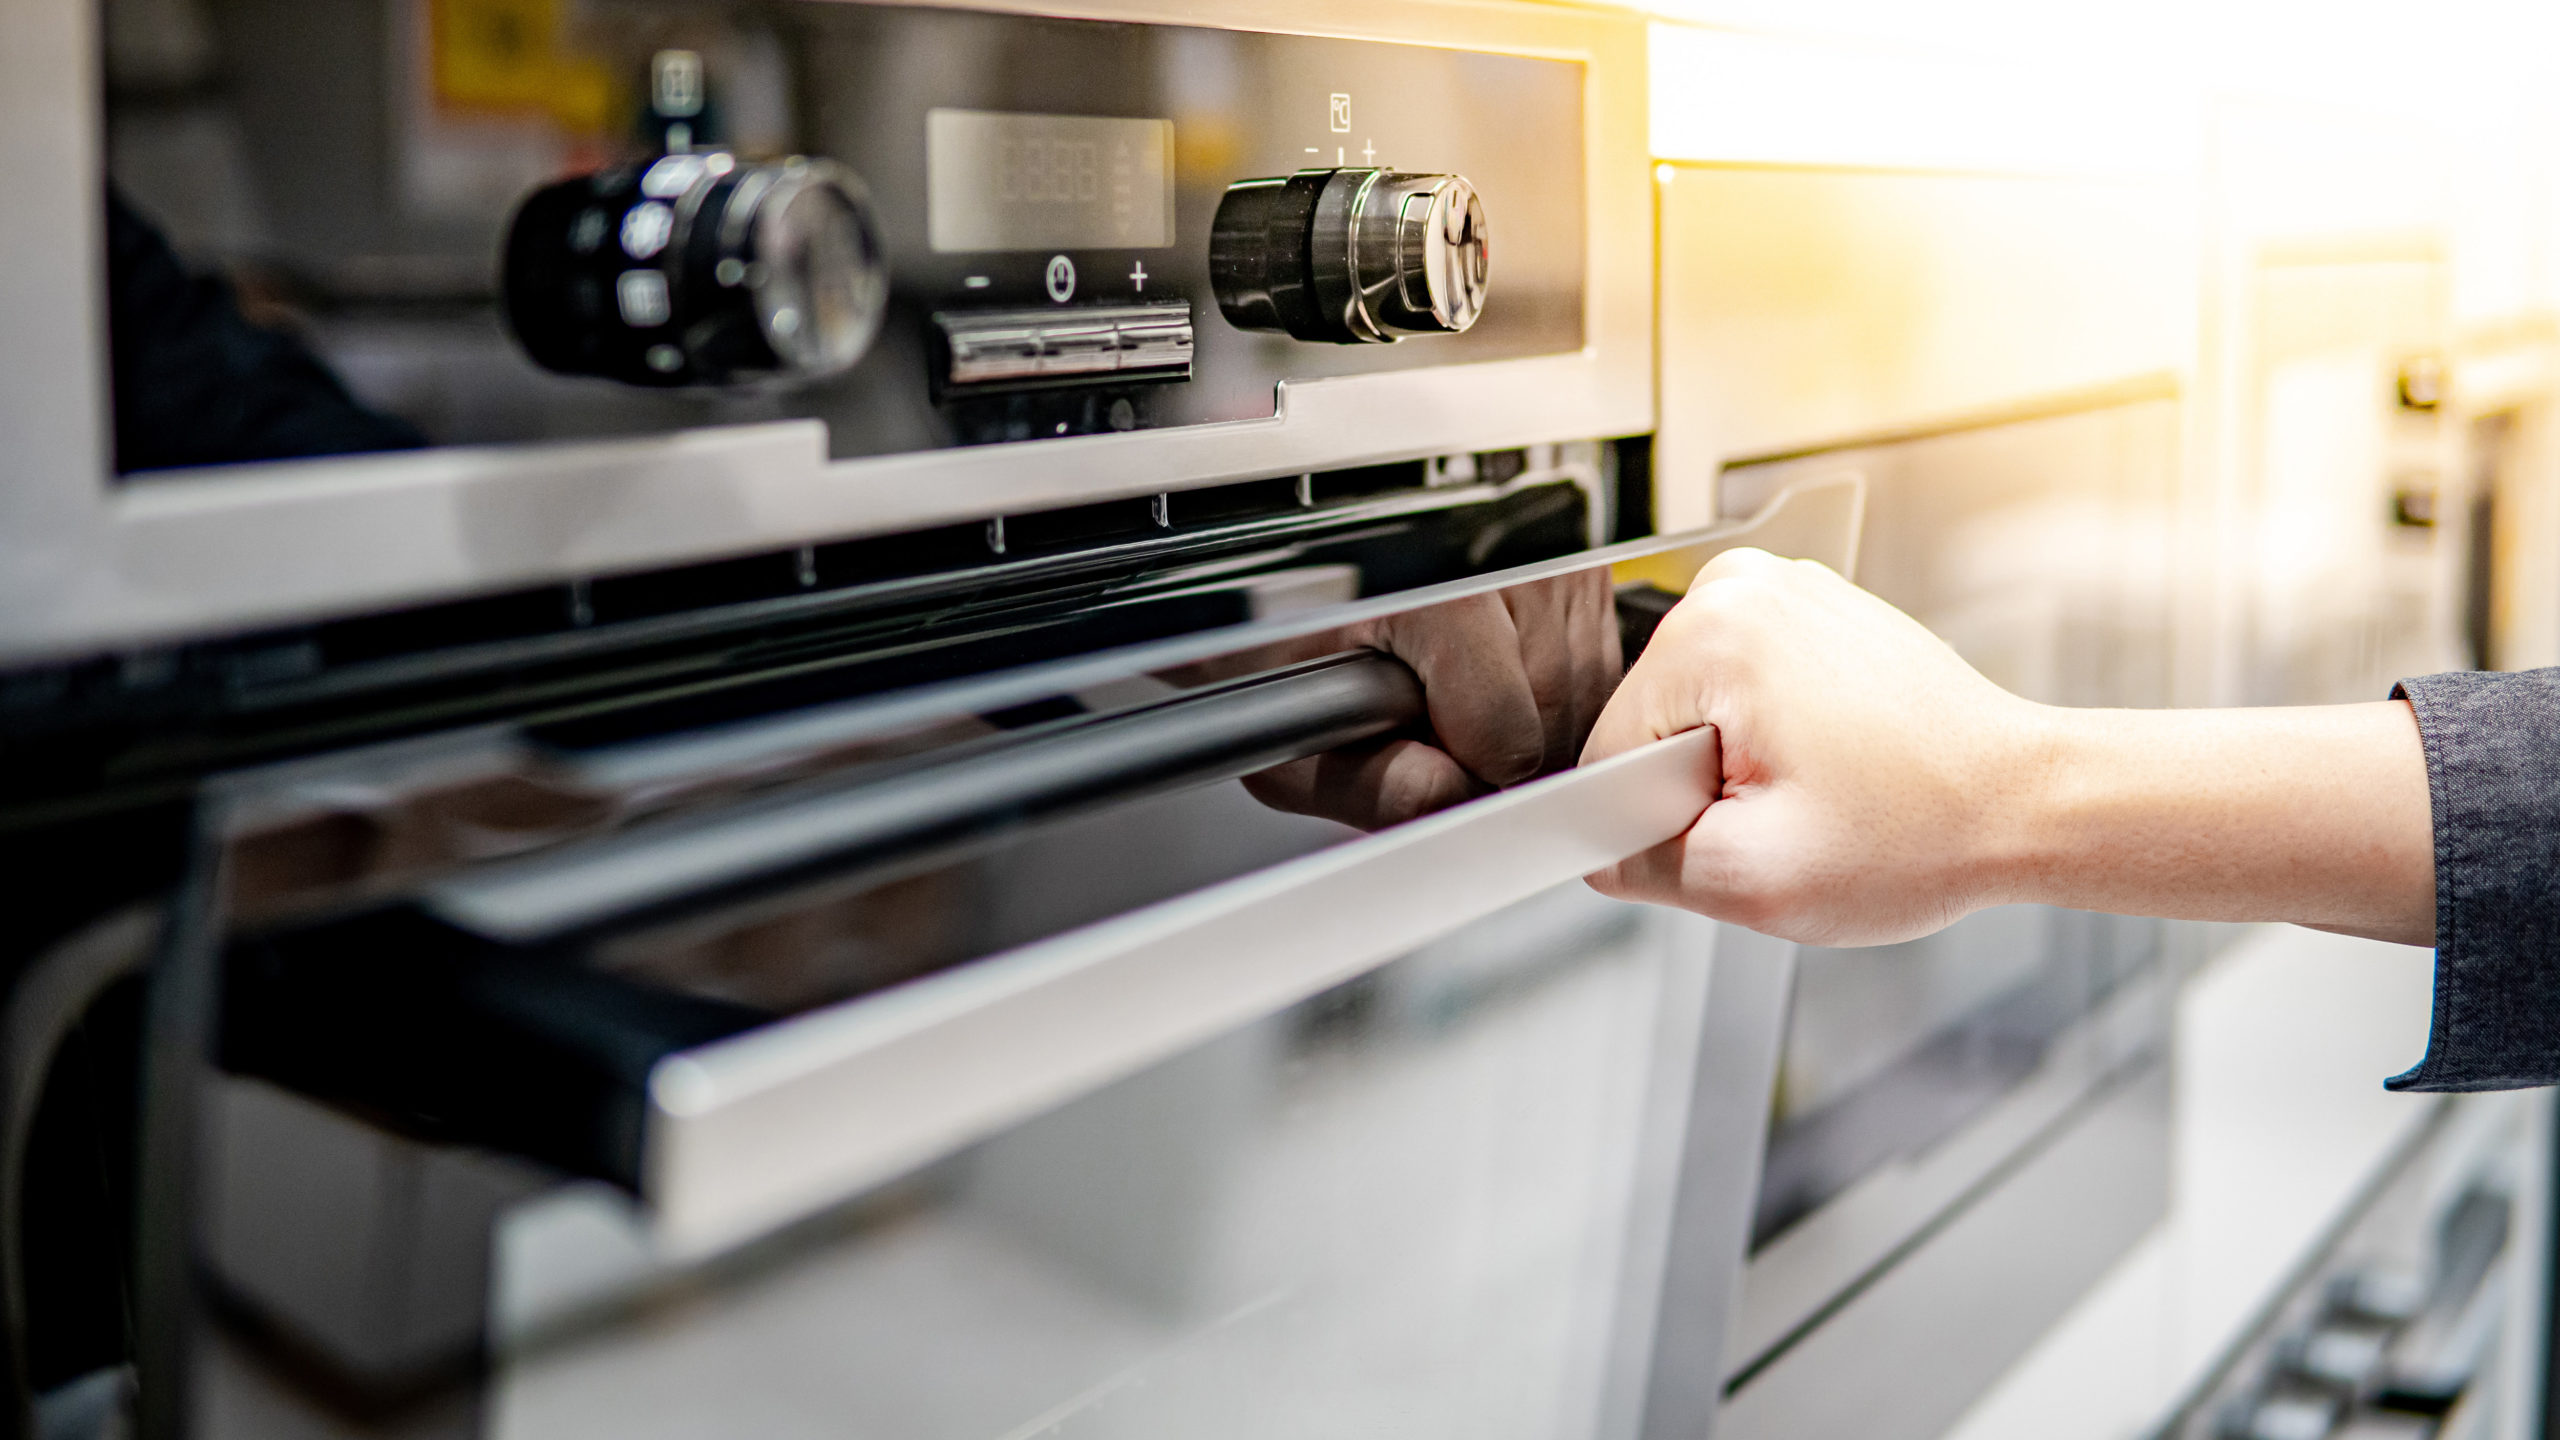 How to Capitalise on Your Oven’s Residual Heat